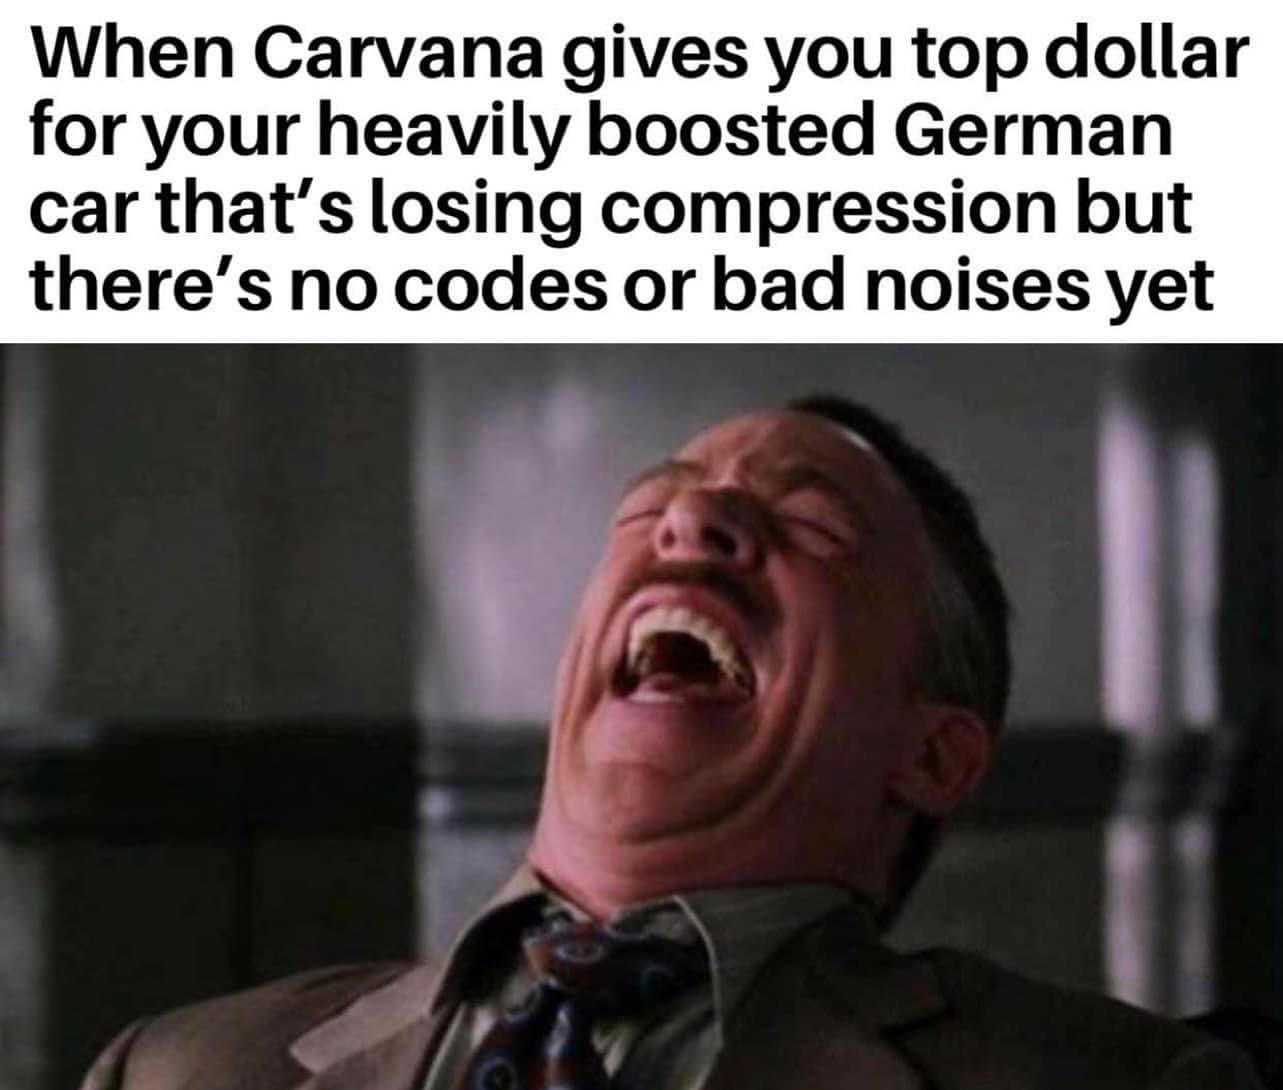 When Carvana gives you top dollar for your heavily boosted German car that's losing compression but there's no codes or bad noises yet.